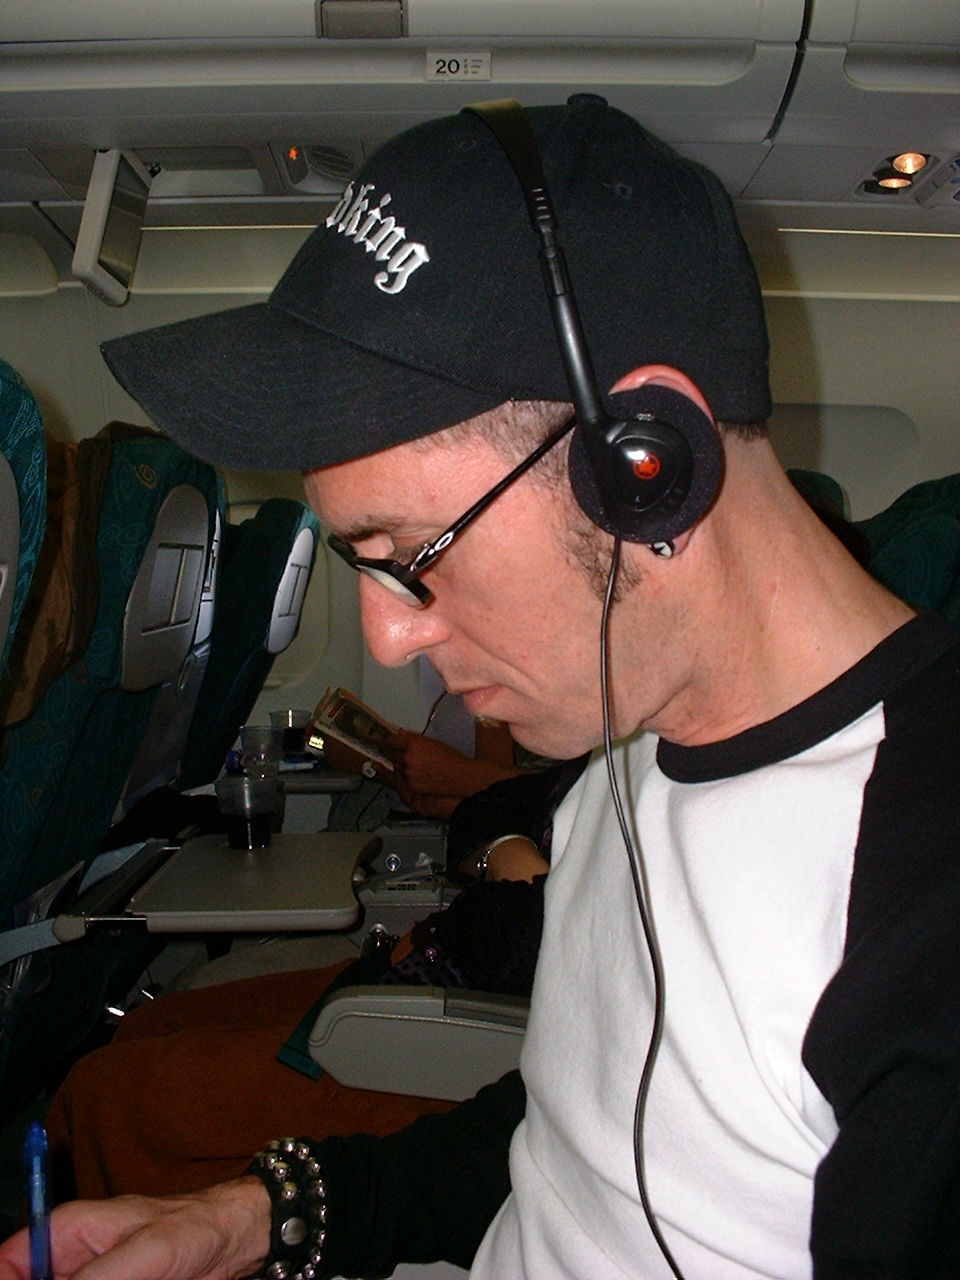 a middle aged white man wearing a cap and headphones